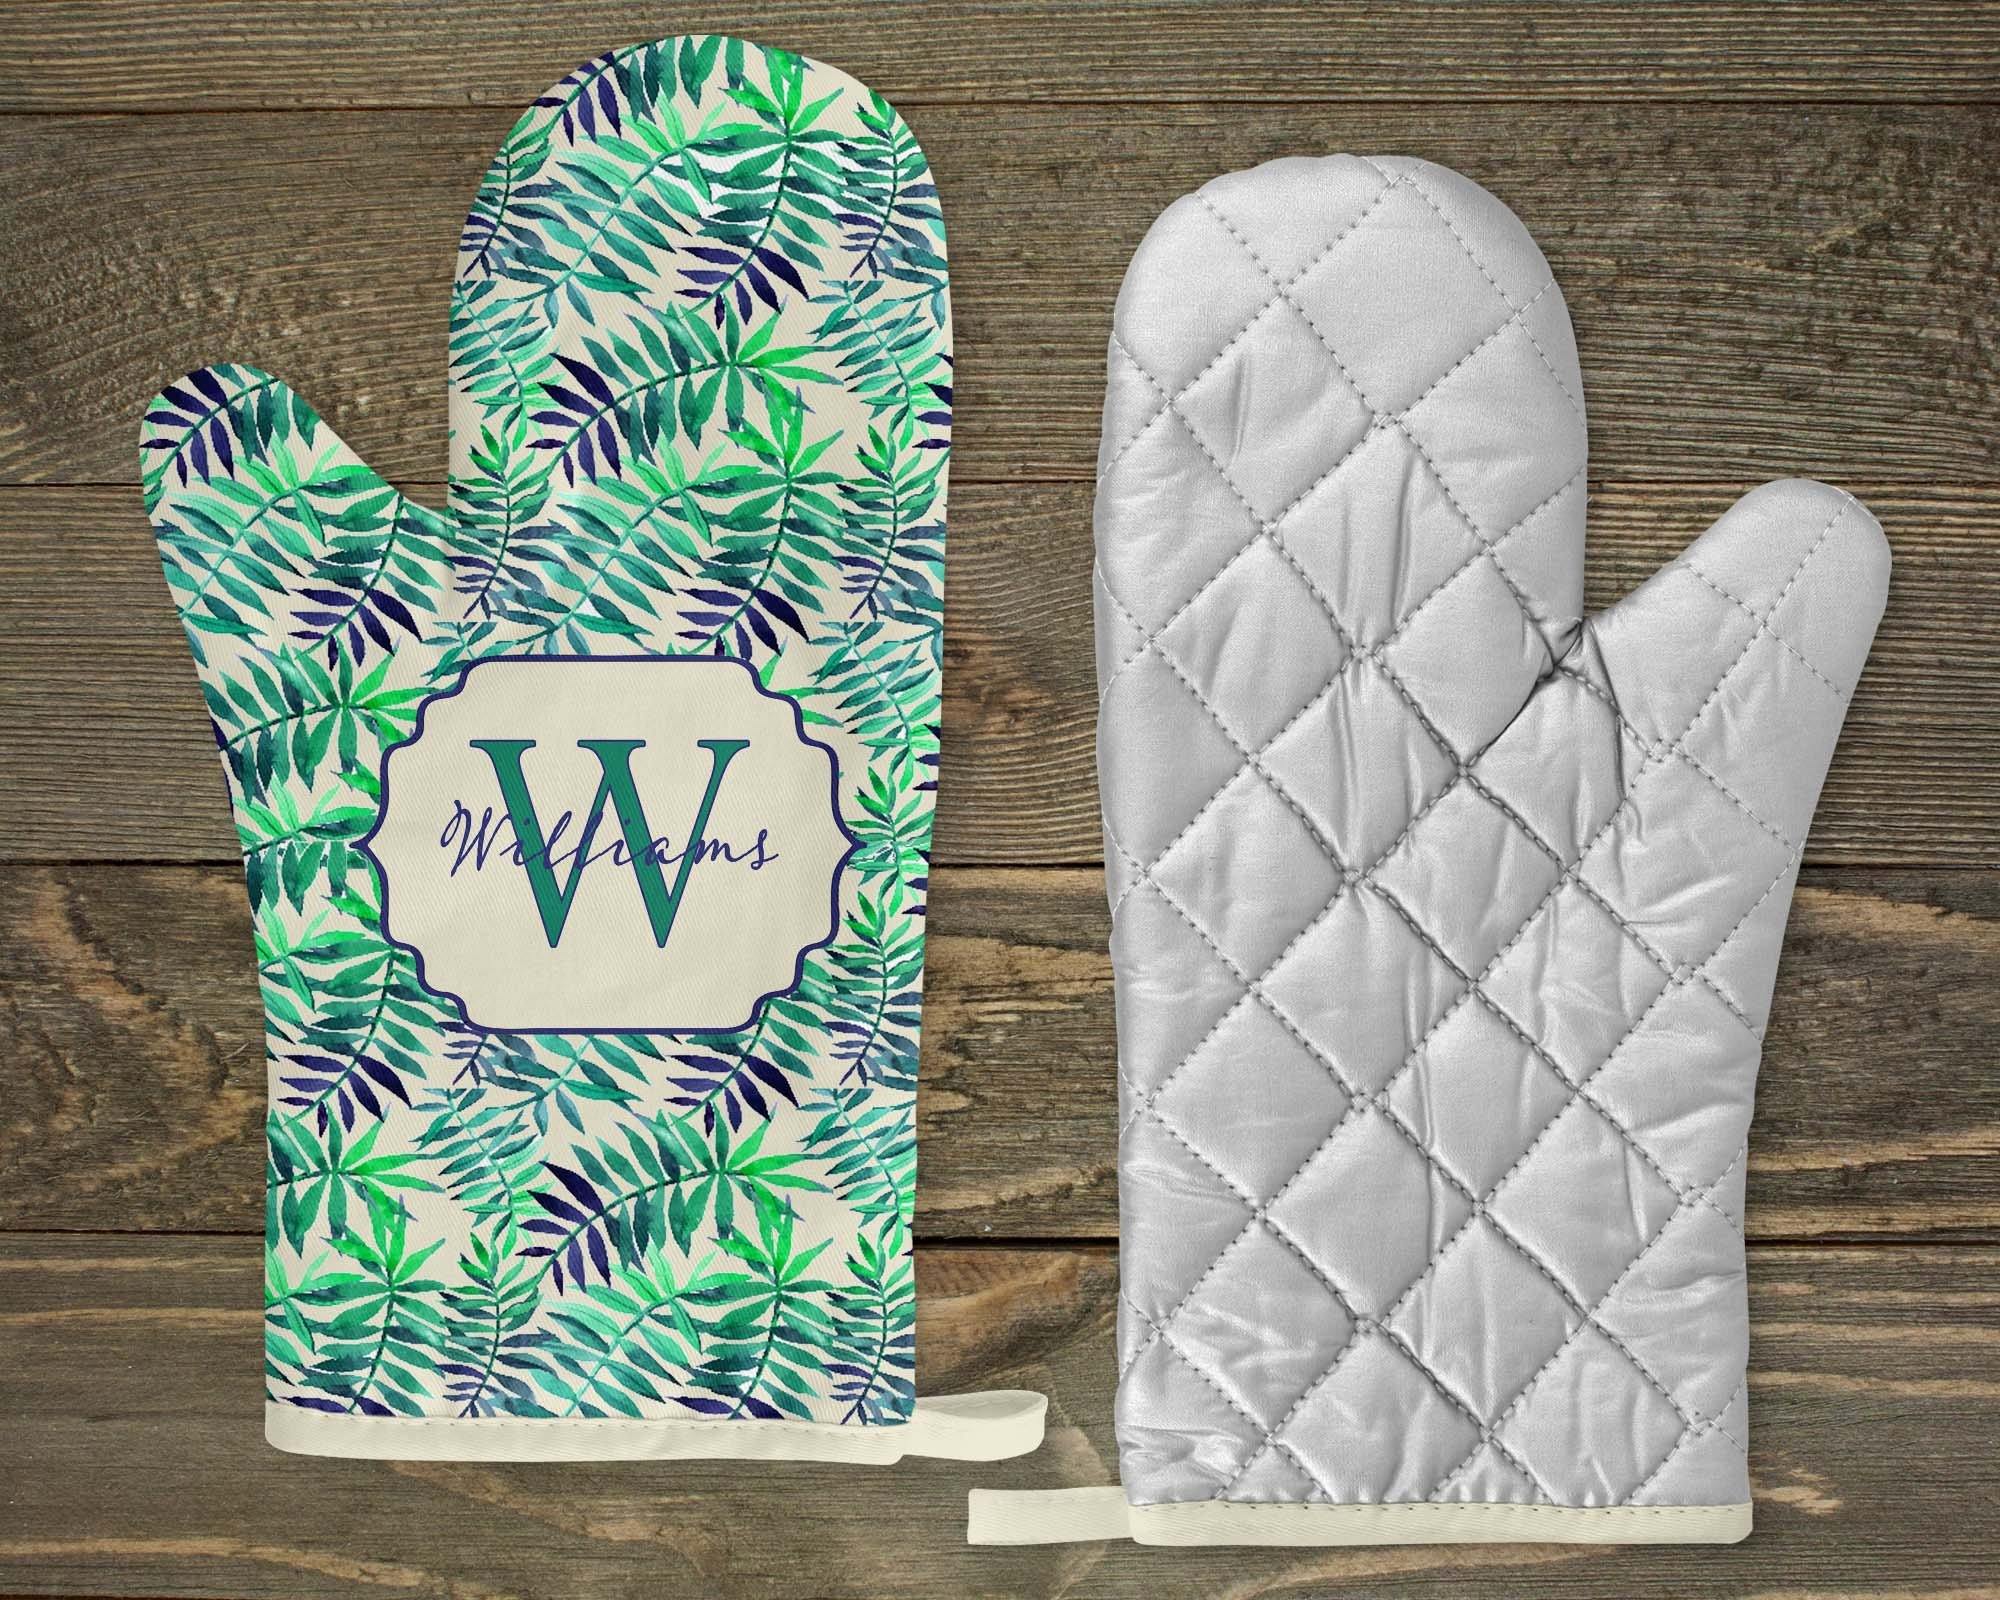 Personalized Pot Holders | Custom Kitchen Decor | Blue and Green Fern - This & That Solutions - Personalized Pot Holders | Custom Kitchen Decor | Blue and Green Fern - Personalized Gifts & Custom Home Decor